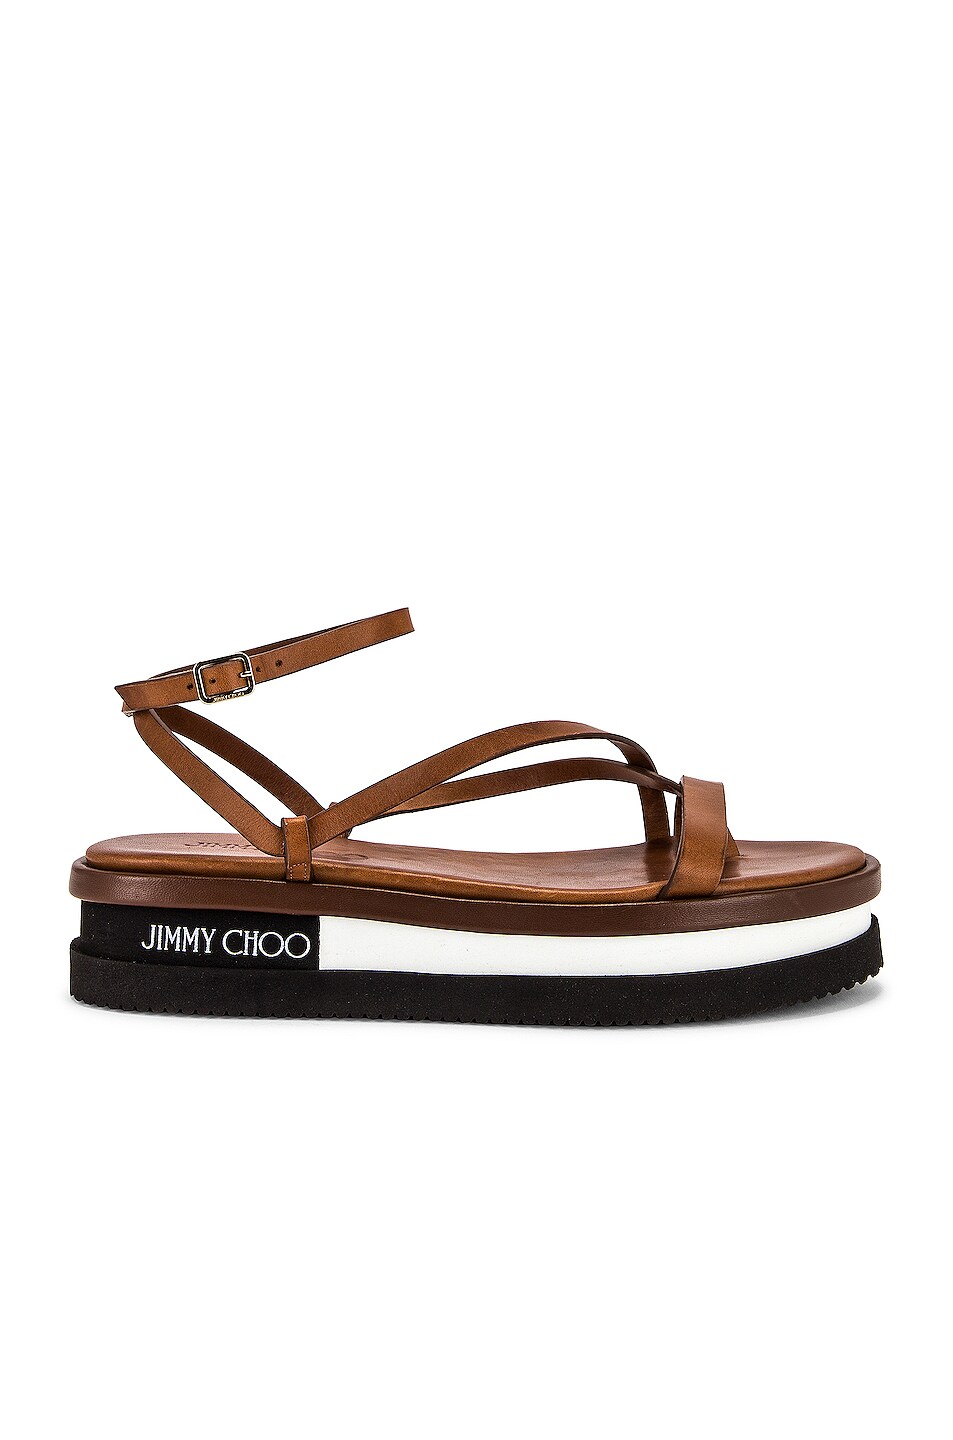 Image 1 of Jimmy Choo Pine Sandal in Cuoio